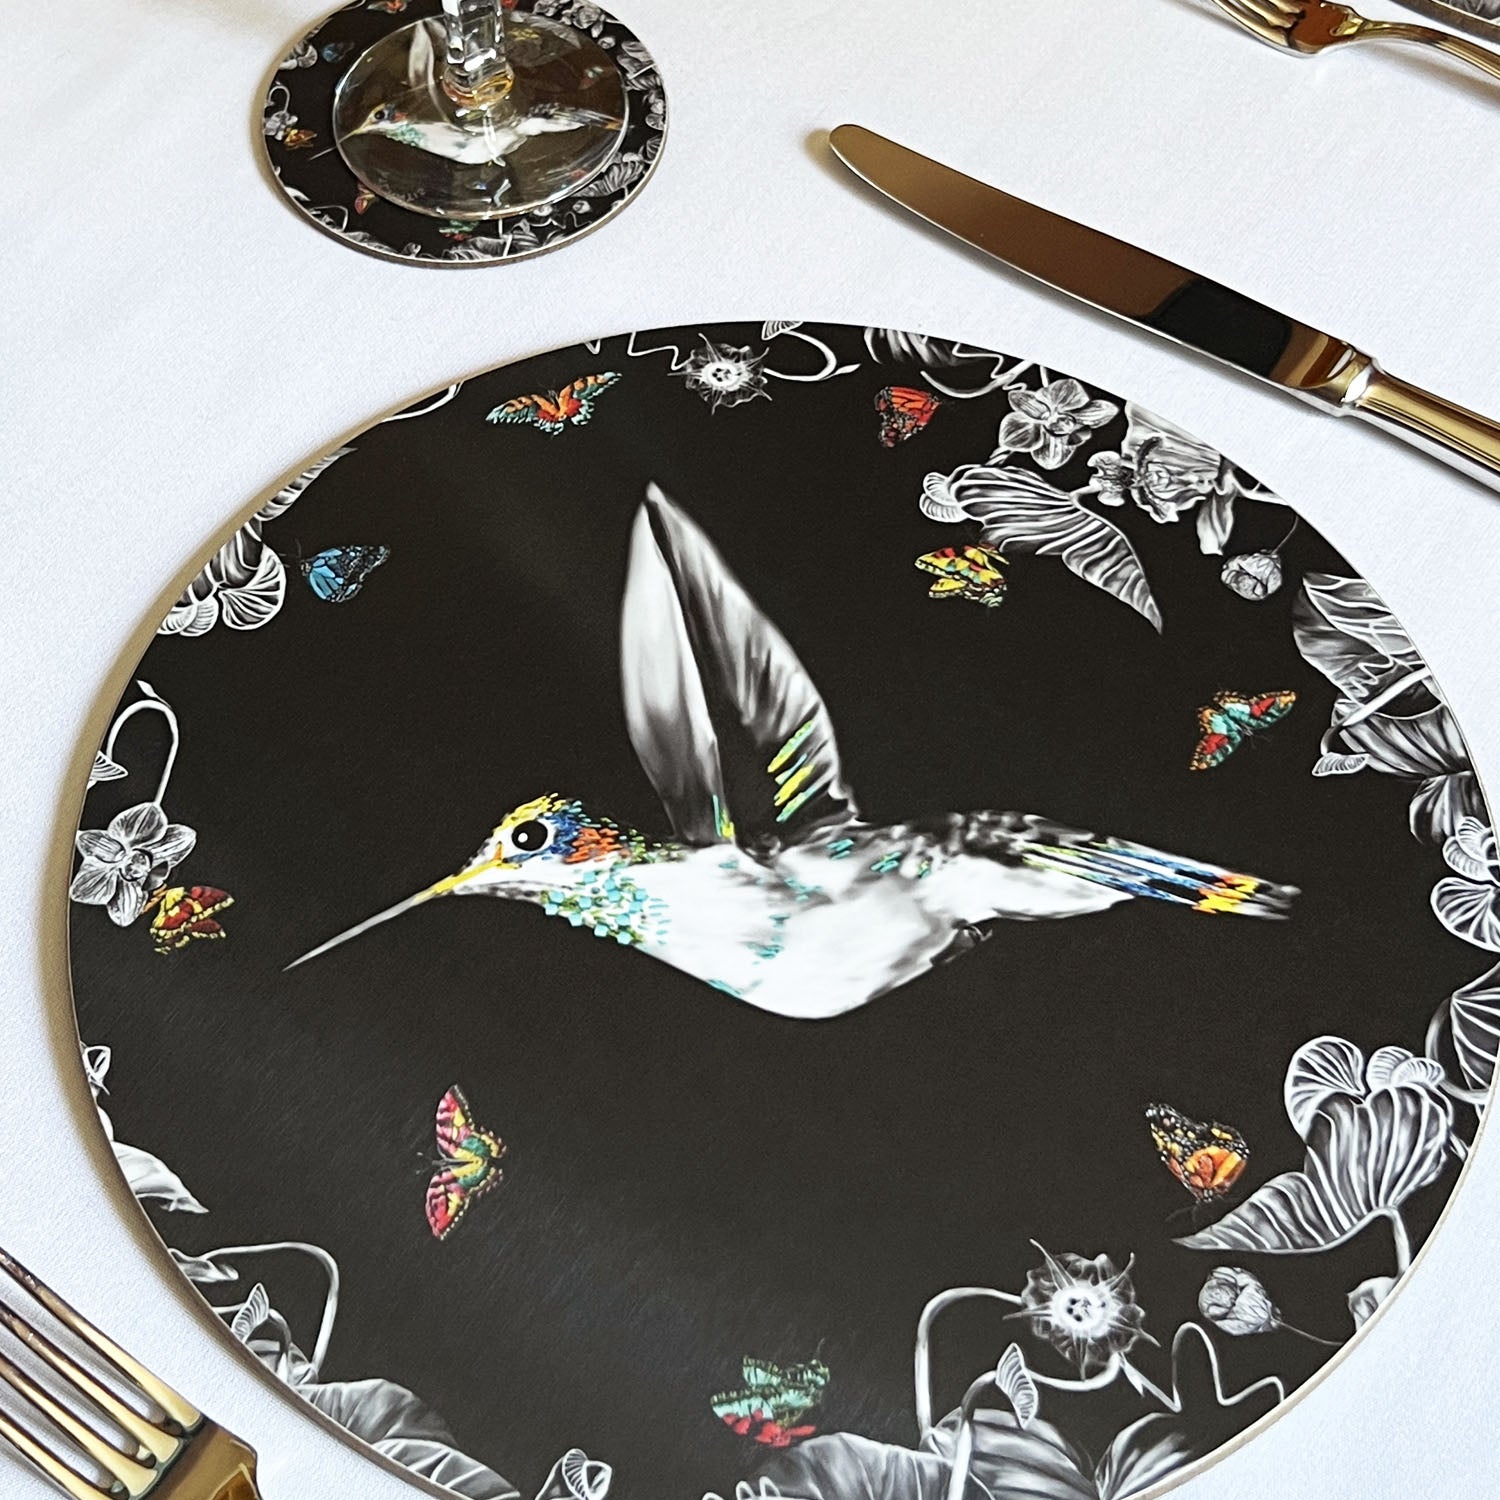 Black hummingbird placemat on table